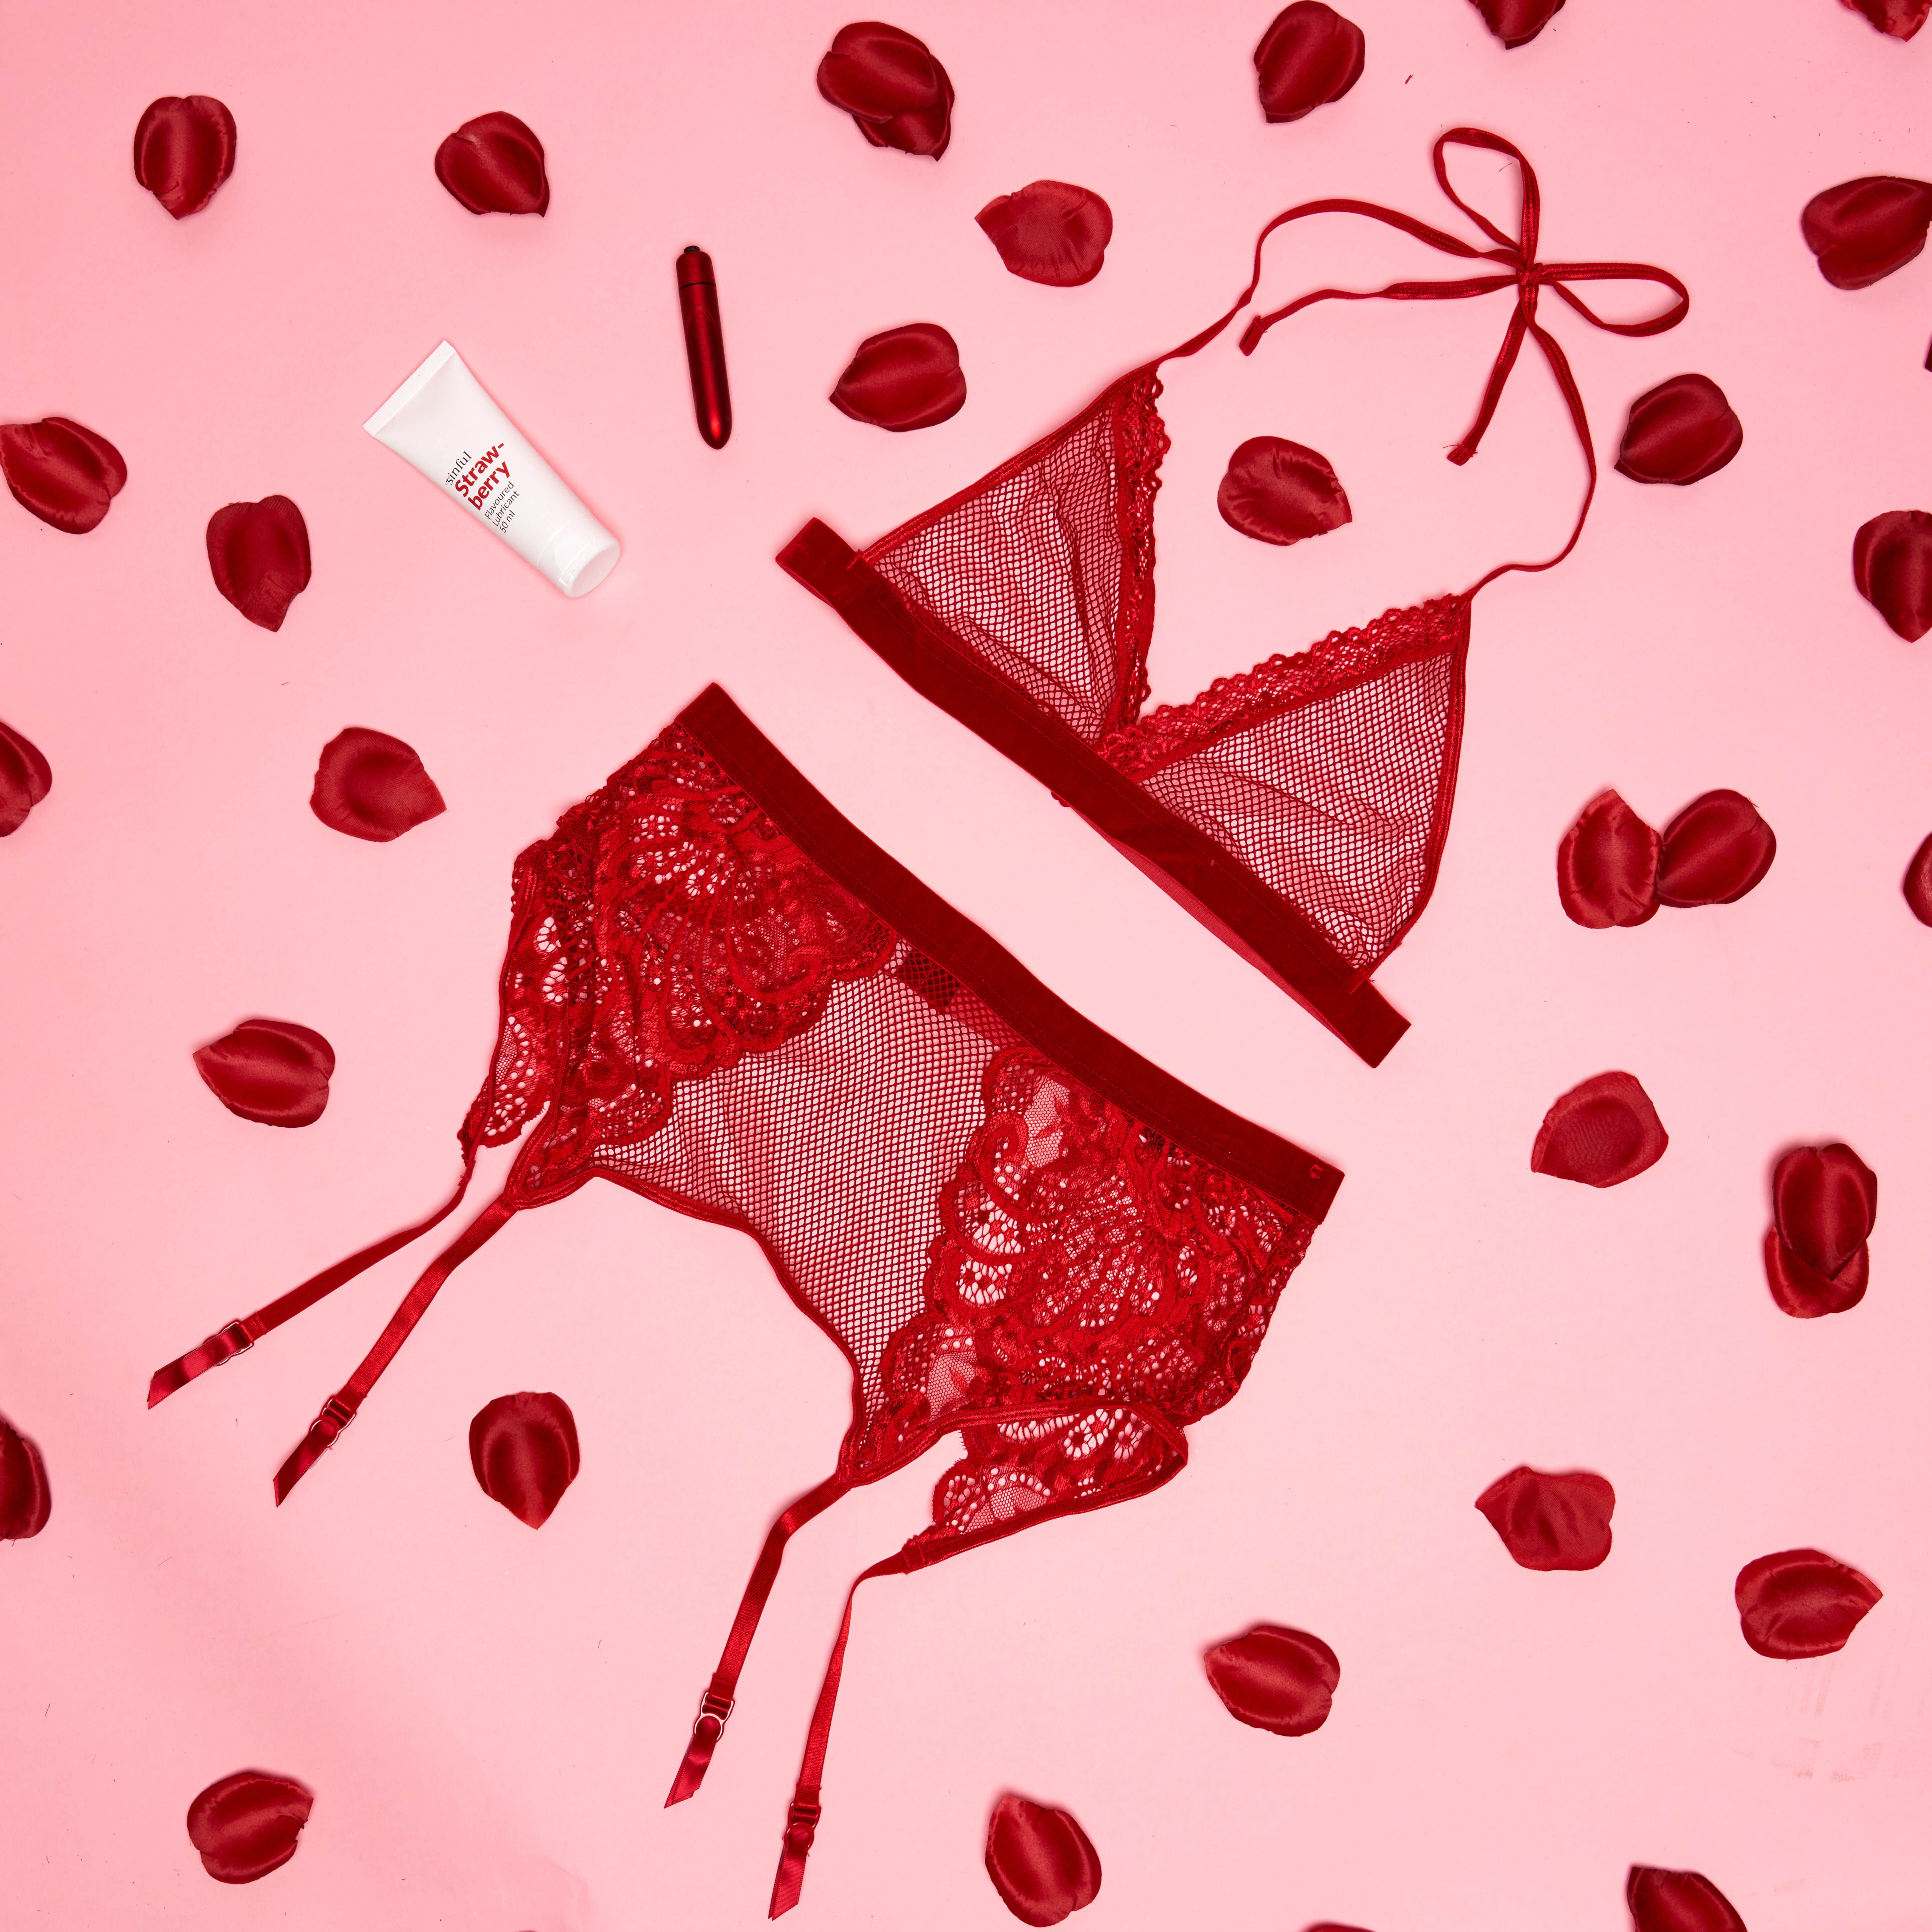 Red lingerie with a red vibrator and rose petals